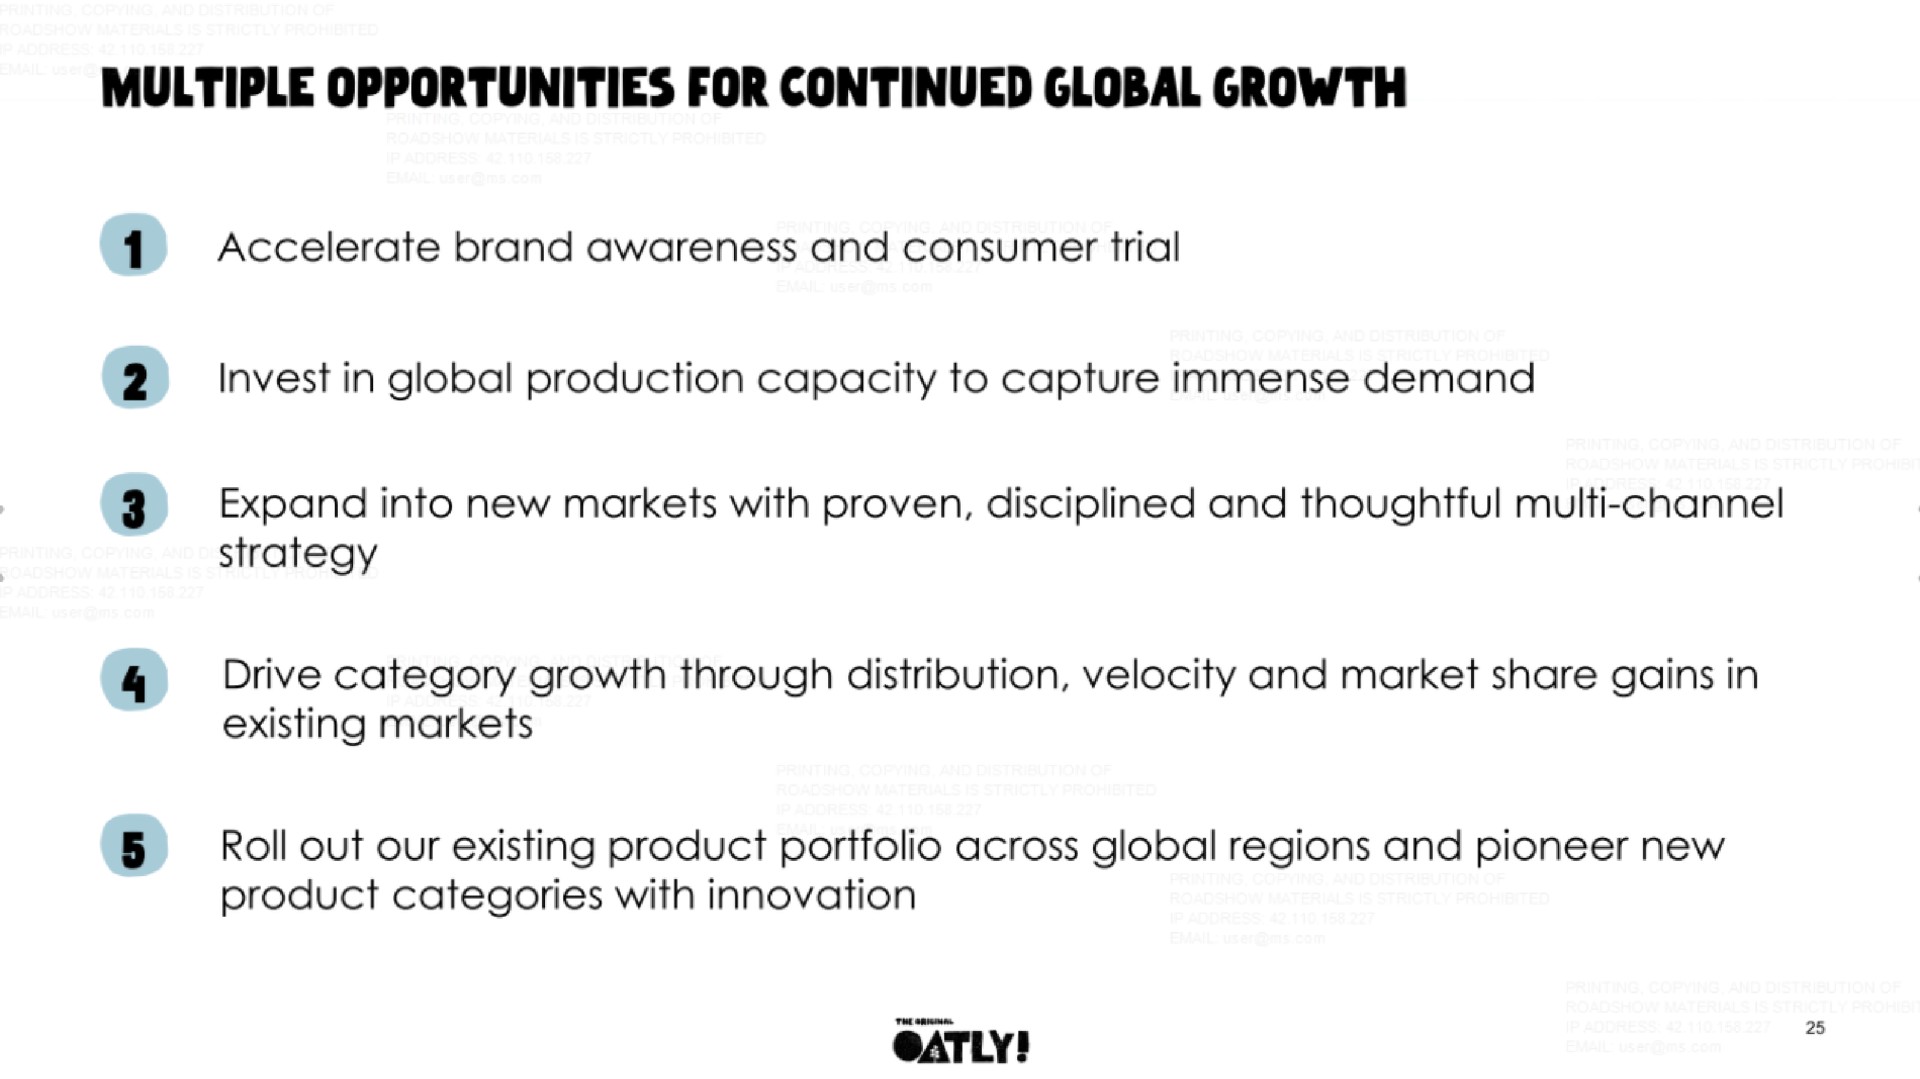 multiple opportunities for continued global growth | Oatly